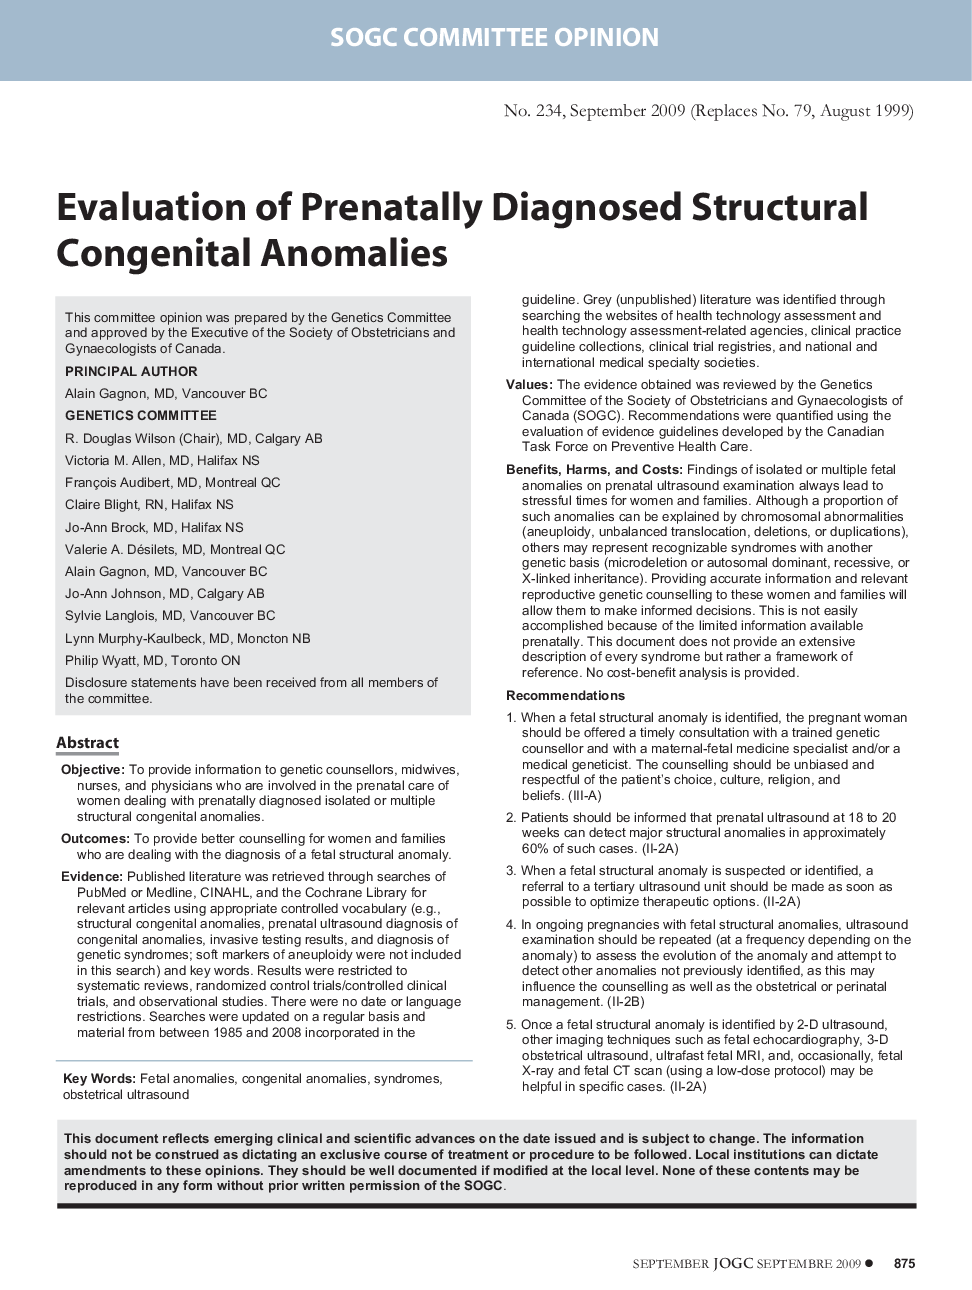 Evaluation of Prenatally Diagnosed Structural Congenital Anomalies